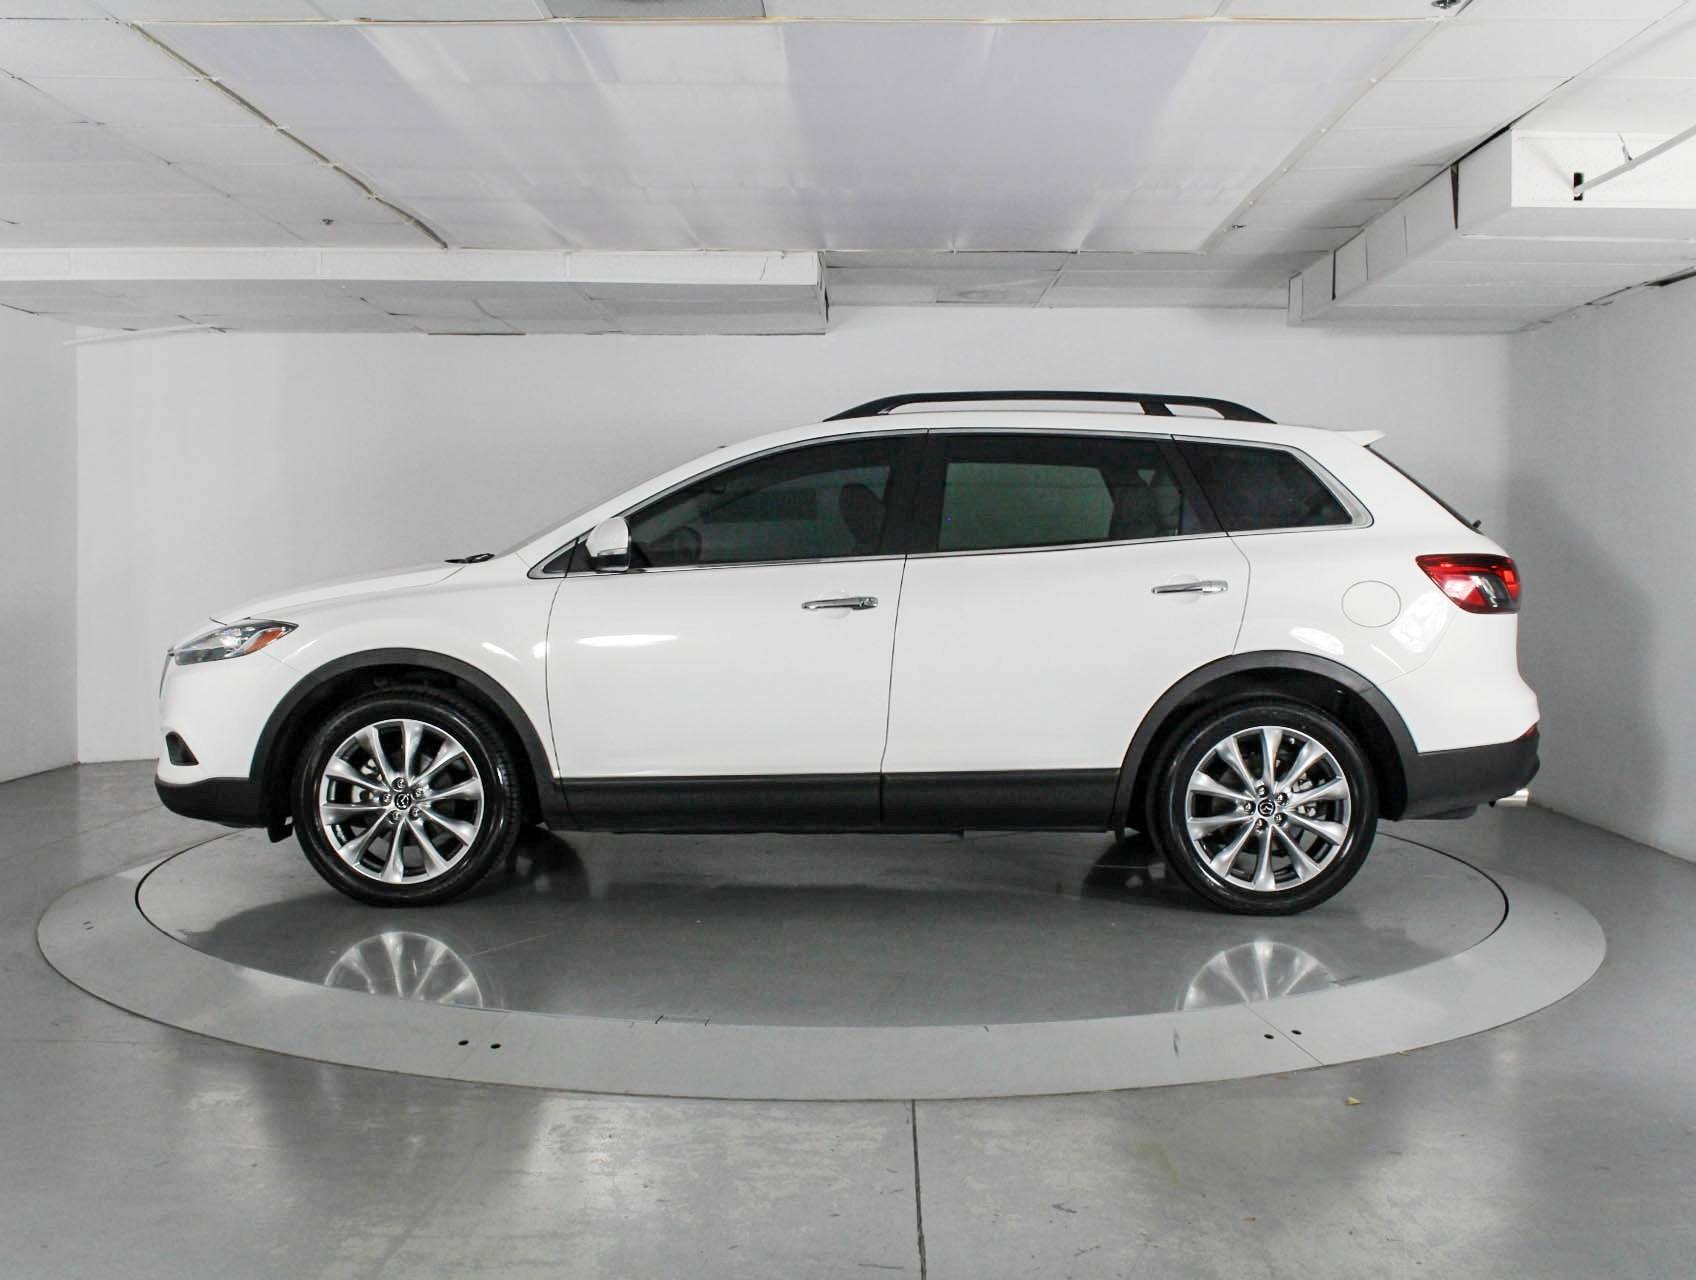 Used 2014 MAZDA CX 9 GRAND TOURING for sale in WEST PALM | 85902